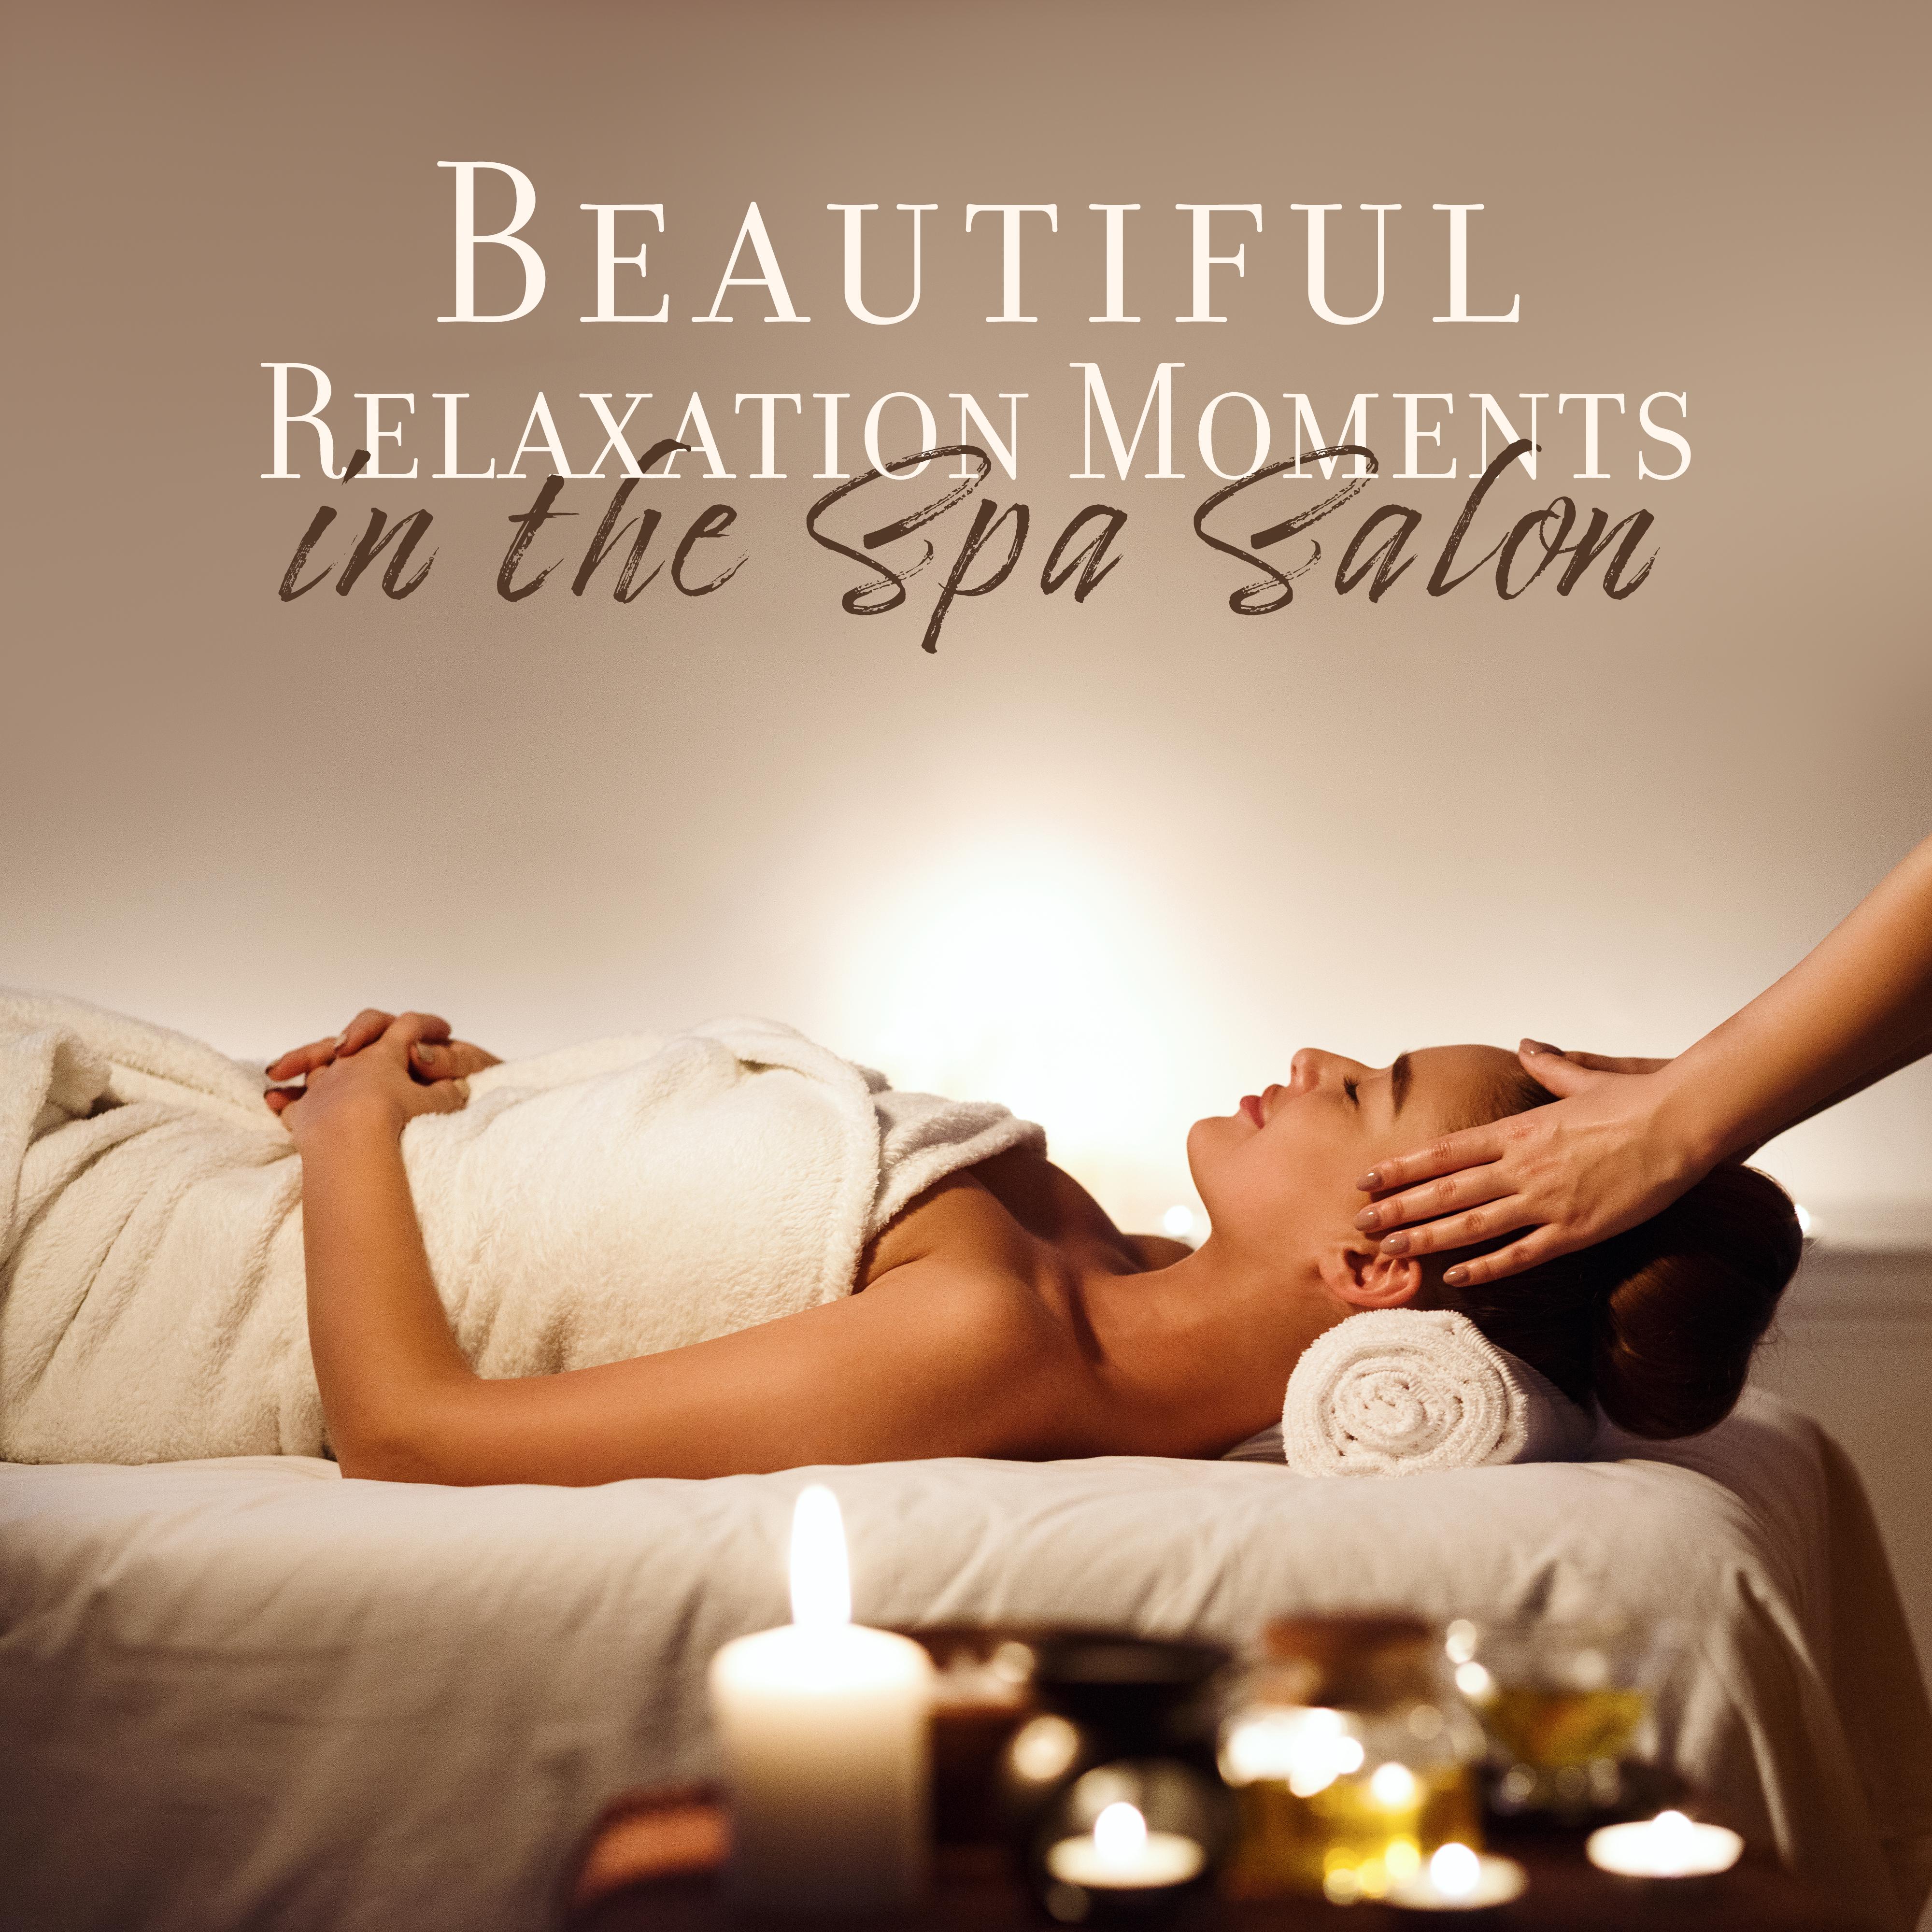 Beautiful Relaxation Moments in the Spa Salon: 2019 New Age Soothing Music for Spa, Wellness, Massage, Hot Bath, Total Relaxing Sounds